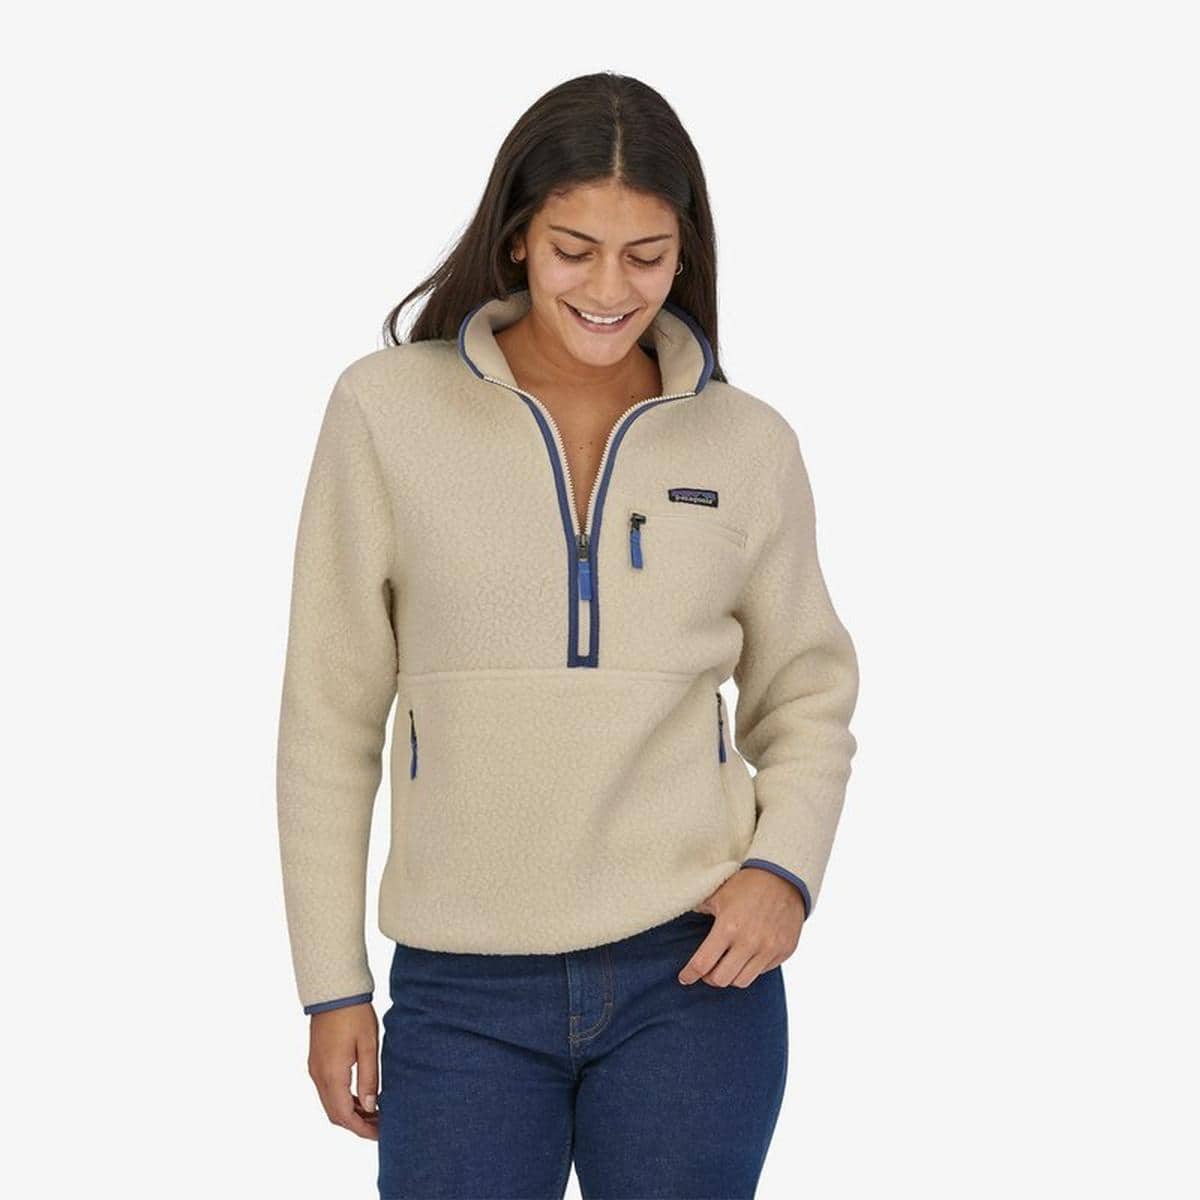 Person wearing a cream fleece and jeans from outdoor brand Patagonia